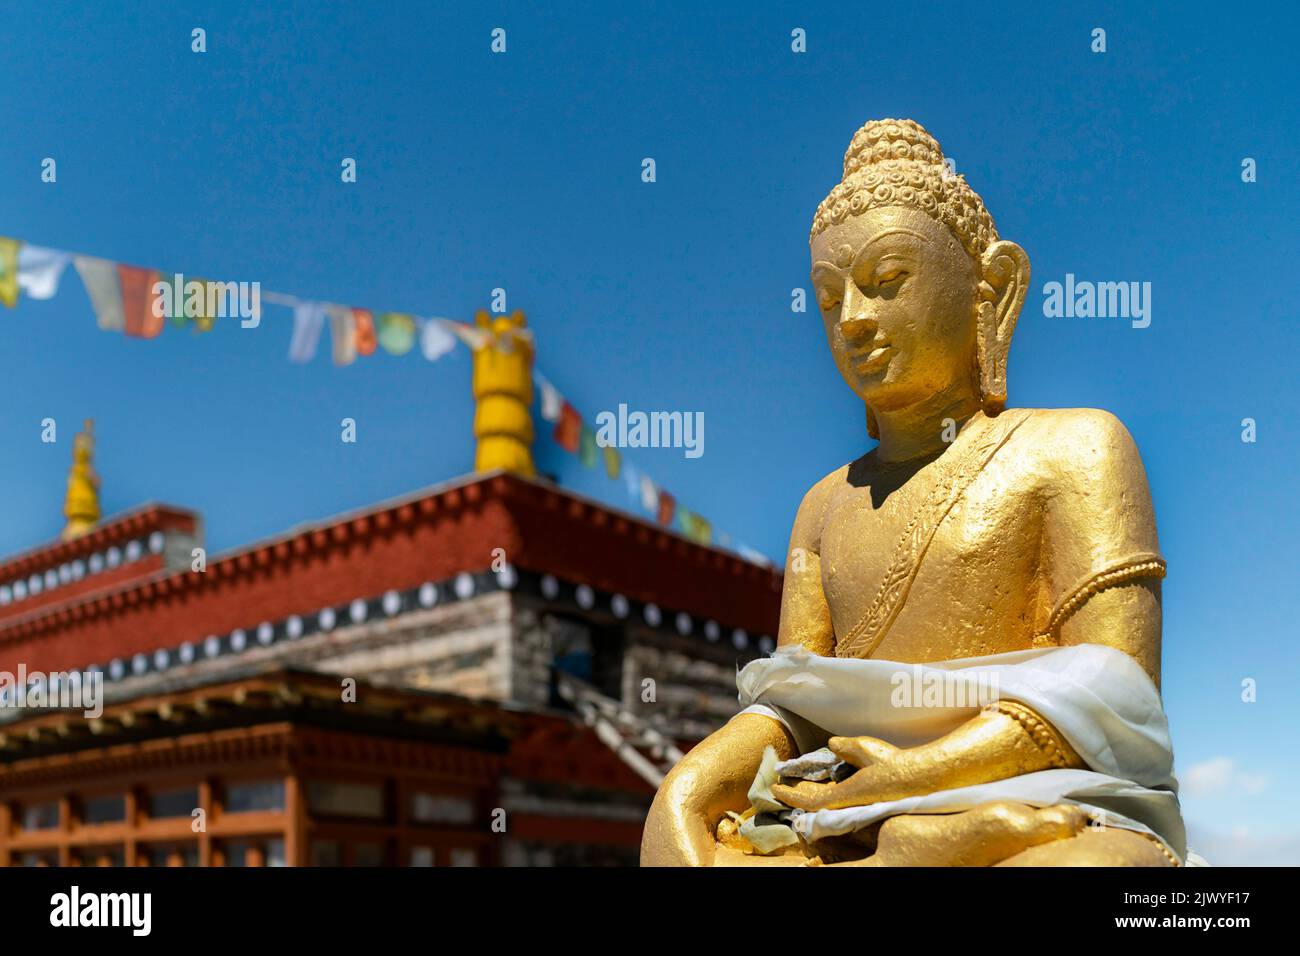 Gold pained statue of meditating Buddha in sitting position against a bright blue sky in the small Himalayan village of Nako, Himachal Pradesh, India. Stock Photo